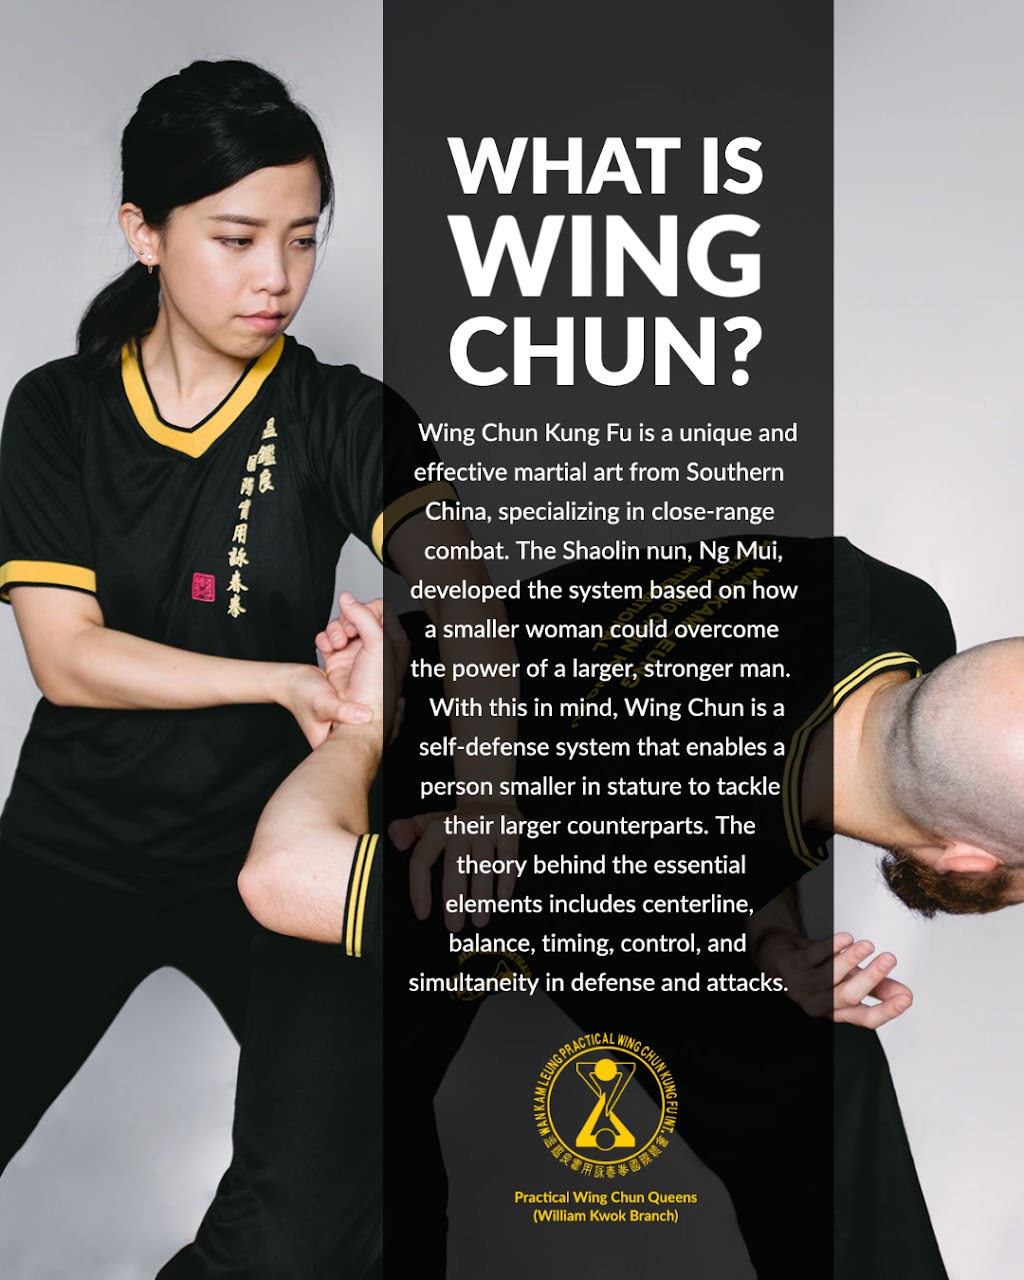 Practical Wing Chun Queens | Photo 5 of 6 | Address: 210-23 Horace Harding Expy, Queens, NY 11364, USA | Phone: (718) 635-0617